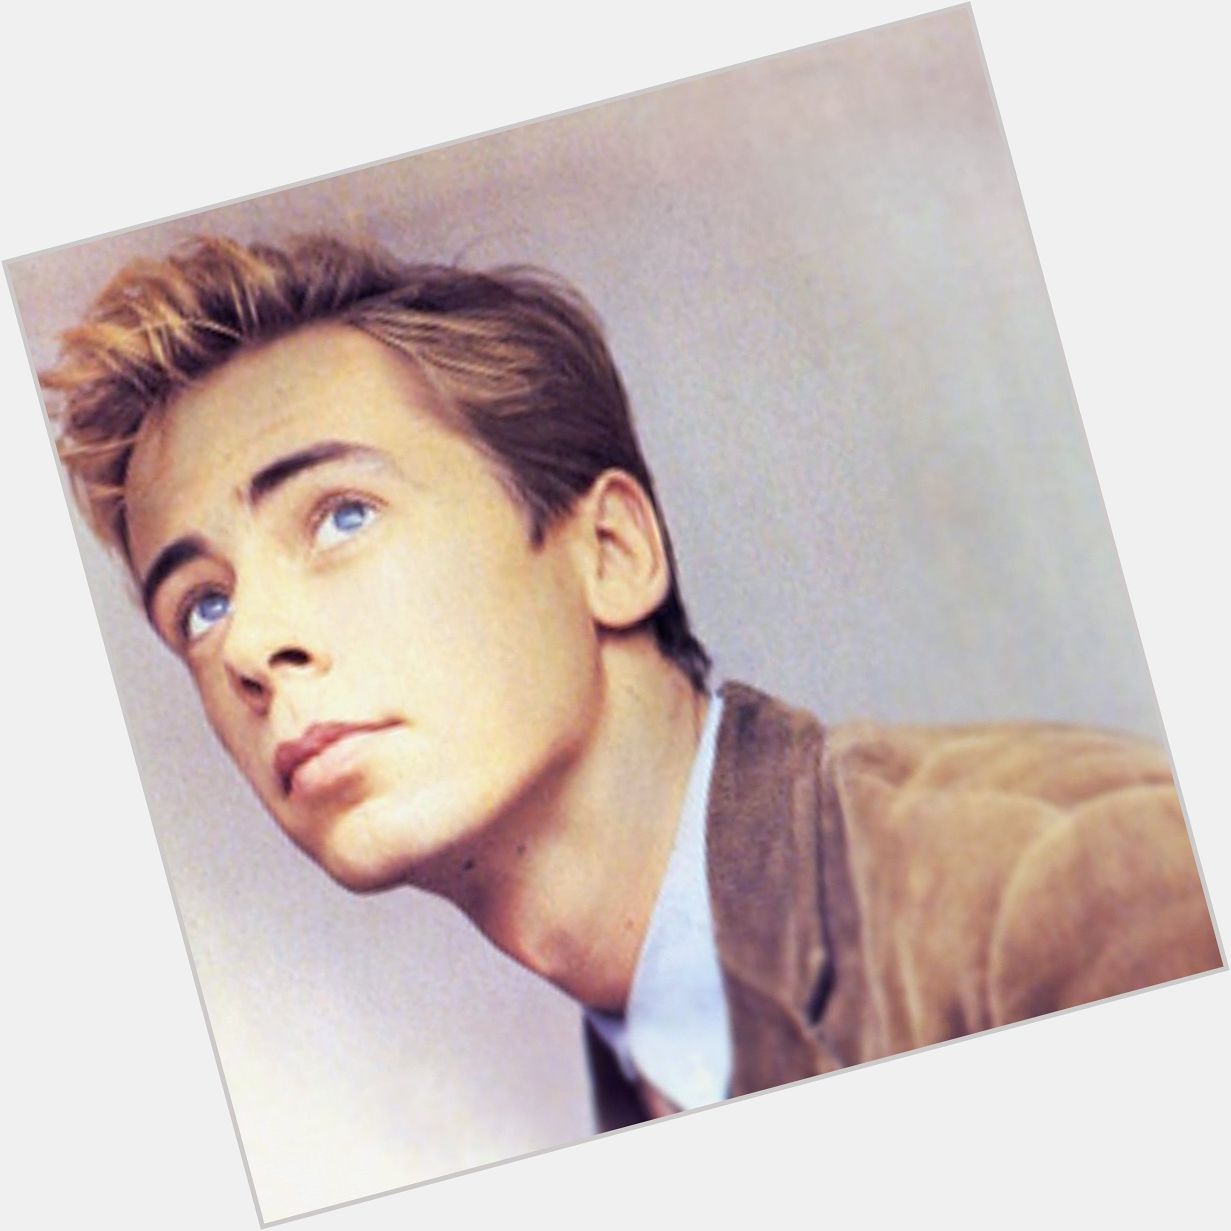 Happy 60th to Nick Heyward of Haircut 100, who was born in 1961  